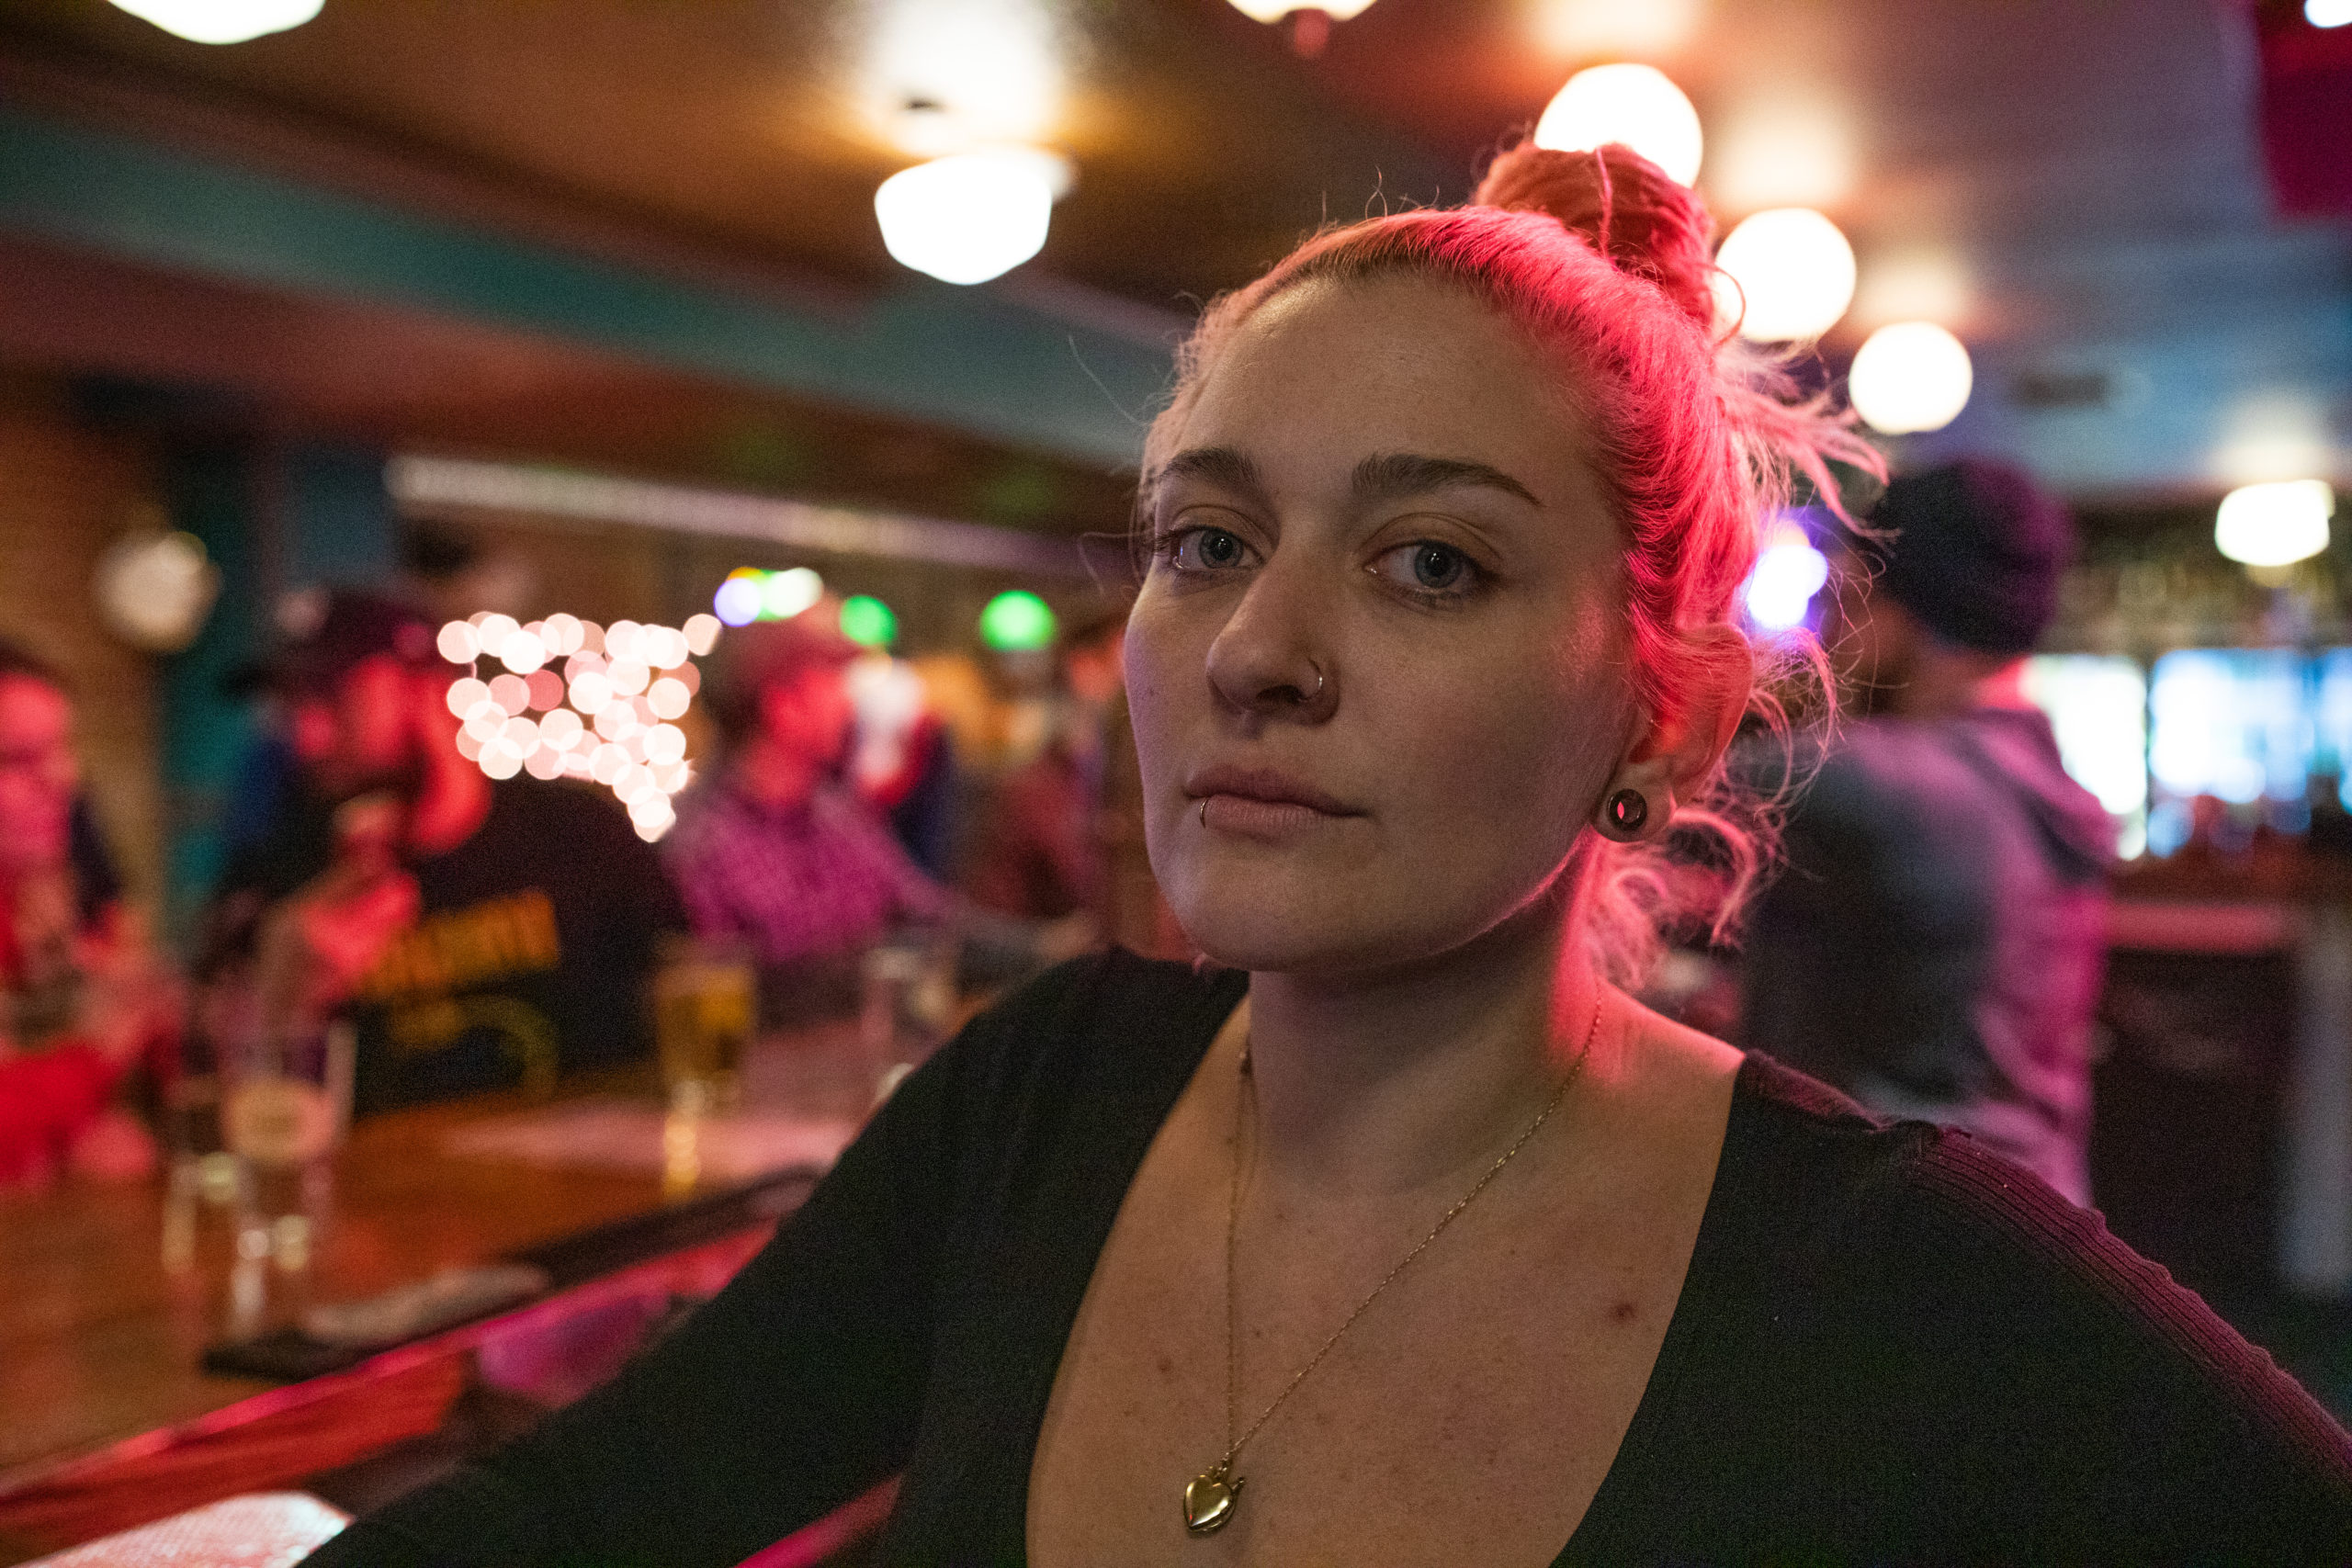 Owner of Someday Bar Megan Rickerson on March 16, 2020, the last night of service for her 8-month-old bar for the foreseeable future due to the coronavirus pandemic. Gov. Andrew Cuomo previously ordered all bars and restaurants would have to close by 8 p.m. on the 16th. They could continue with takeout and delivery. Photo: Paul Frangipane/Brooklyn Eagle